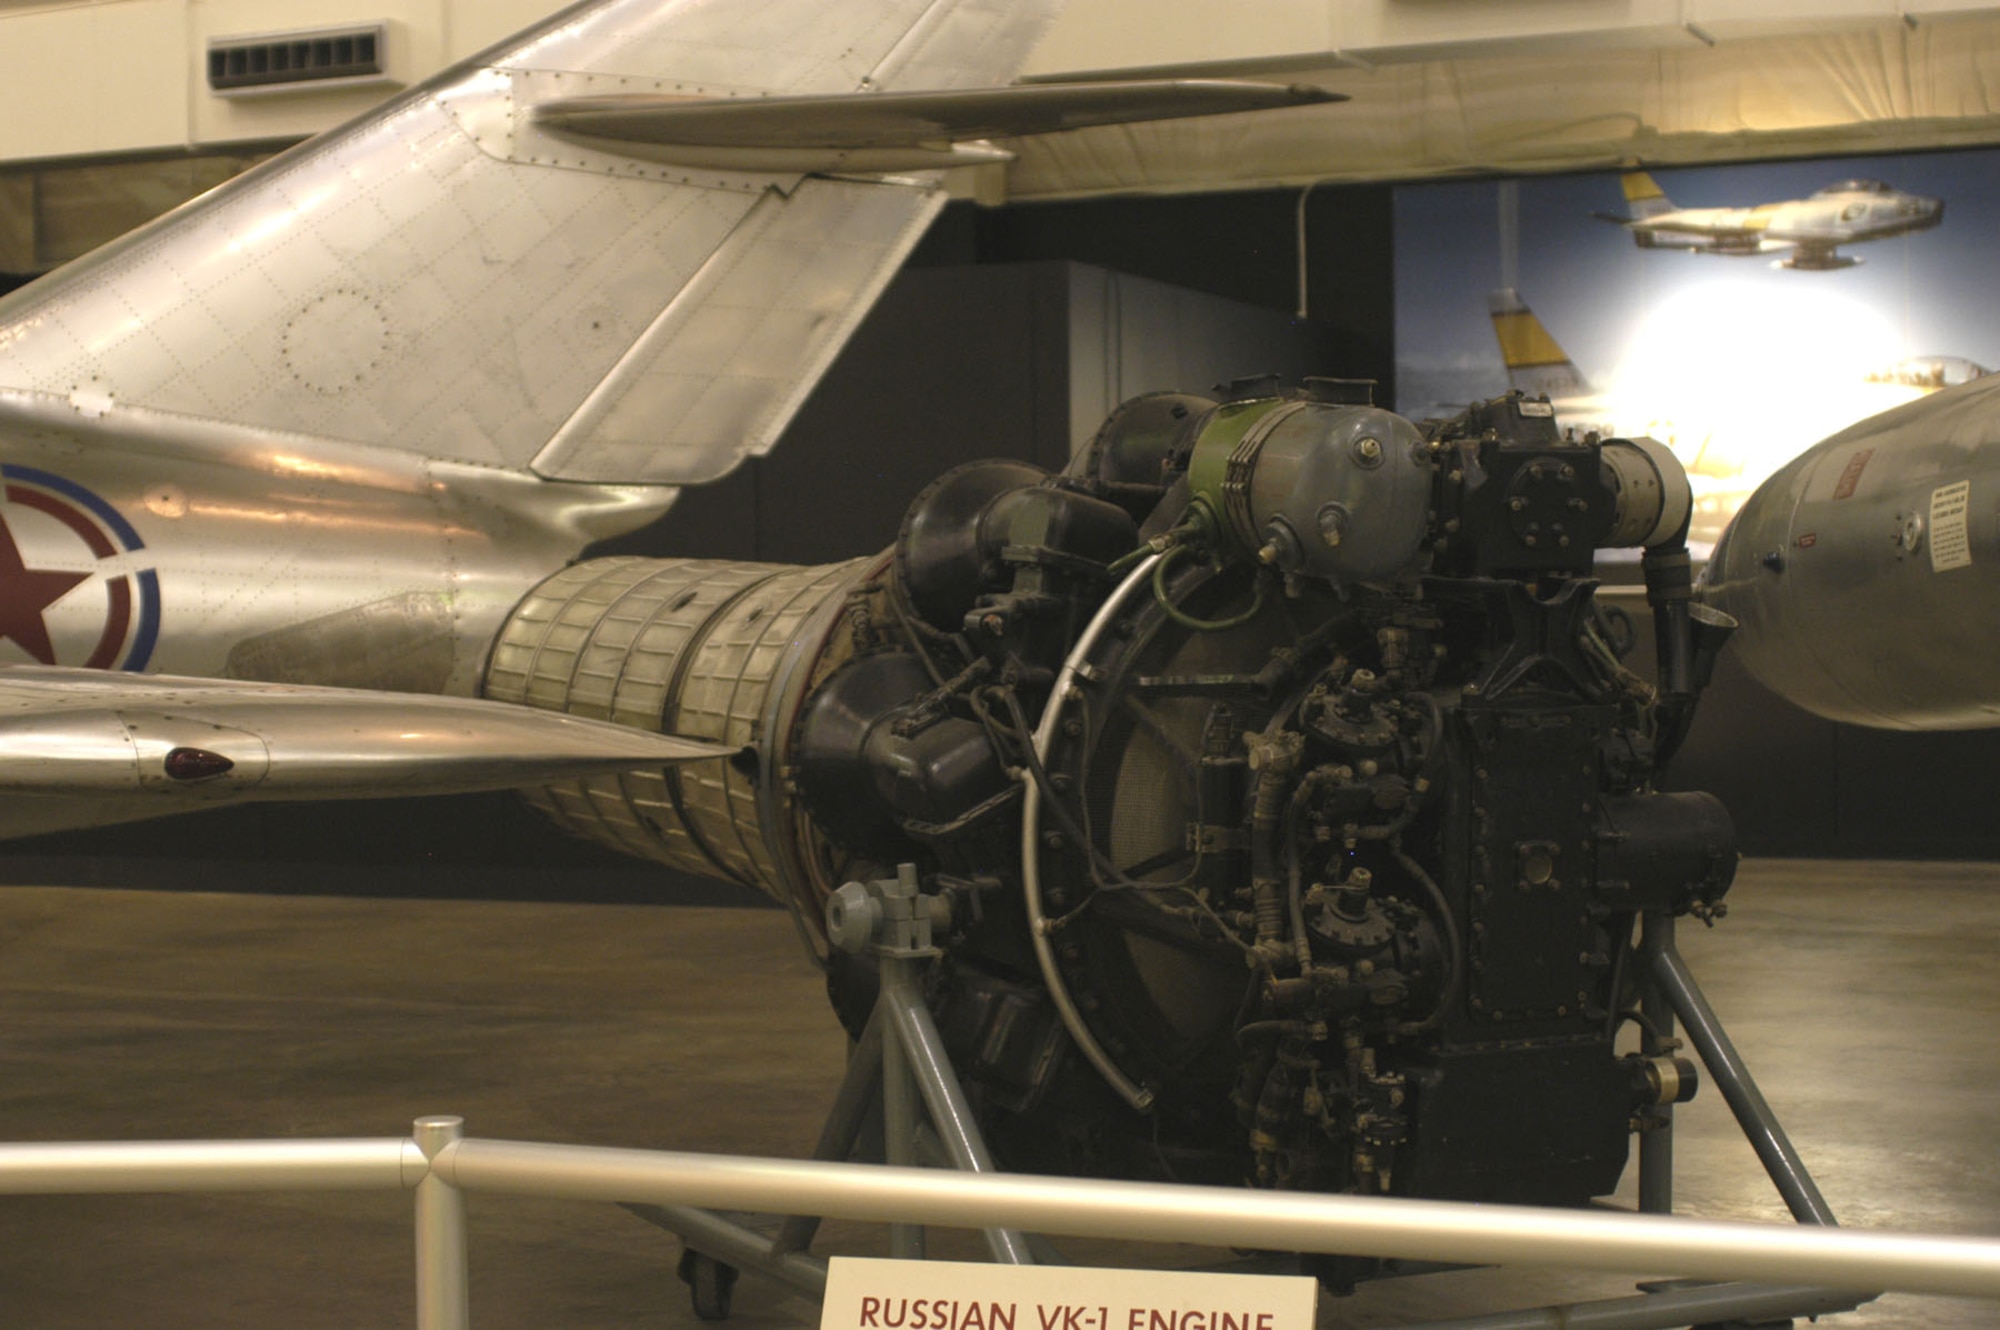 DAYTON, Ohio -- Russian VK-1 on display in the Korean War Gallery at the National Museum of the United States Air Force. (U.S. Air Force photo)